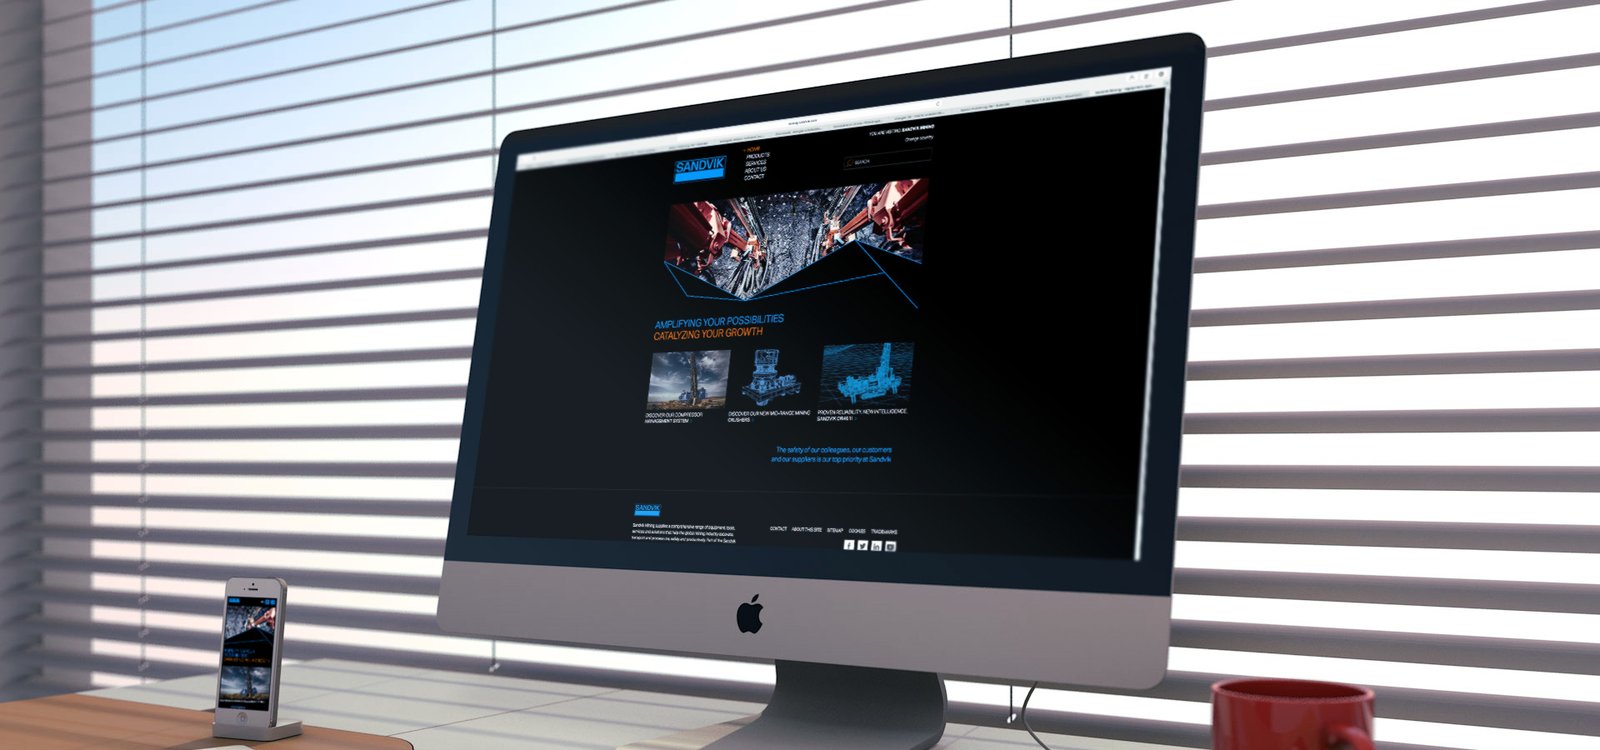 <p>The new Sandvik Mining site is responsive and functions on a range of devices, including desktops, cell phones, smart phones and tablets.</p>
